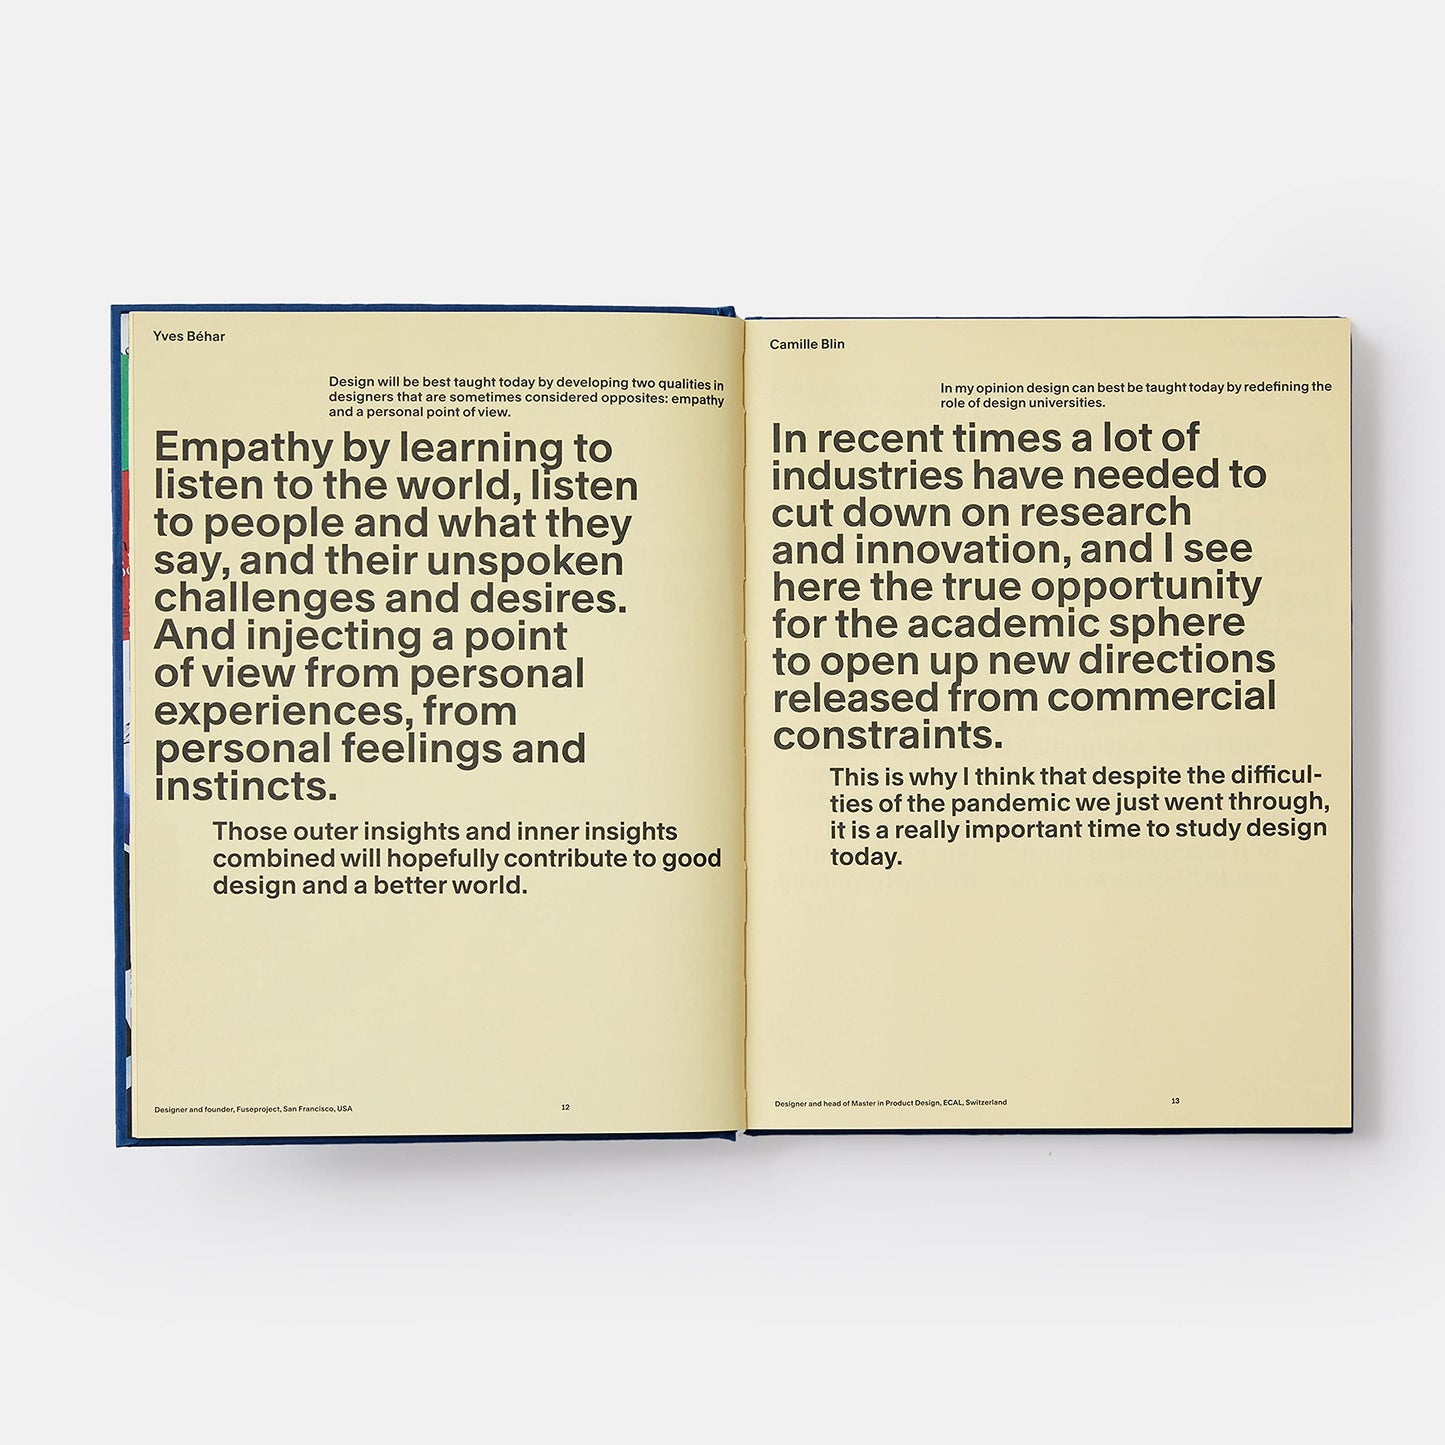 ECAL Manual of Style: How to best teach design today?